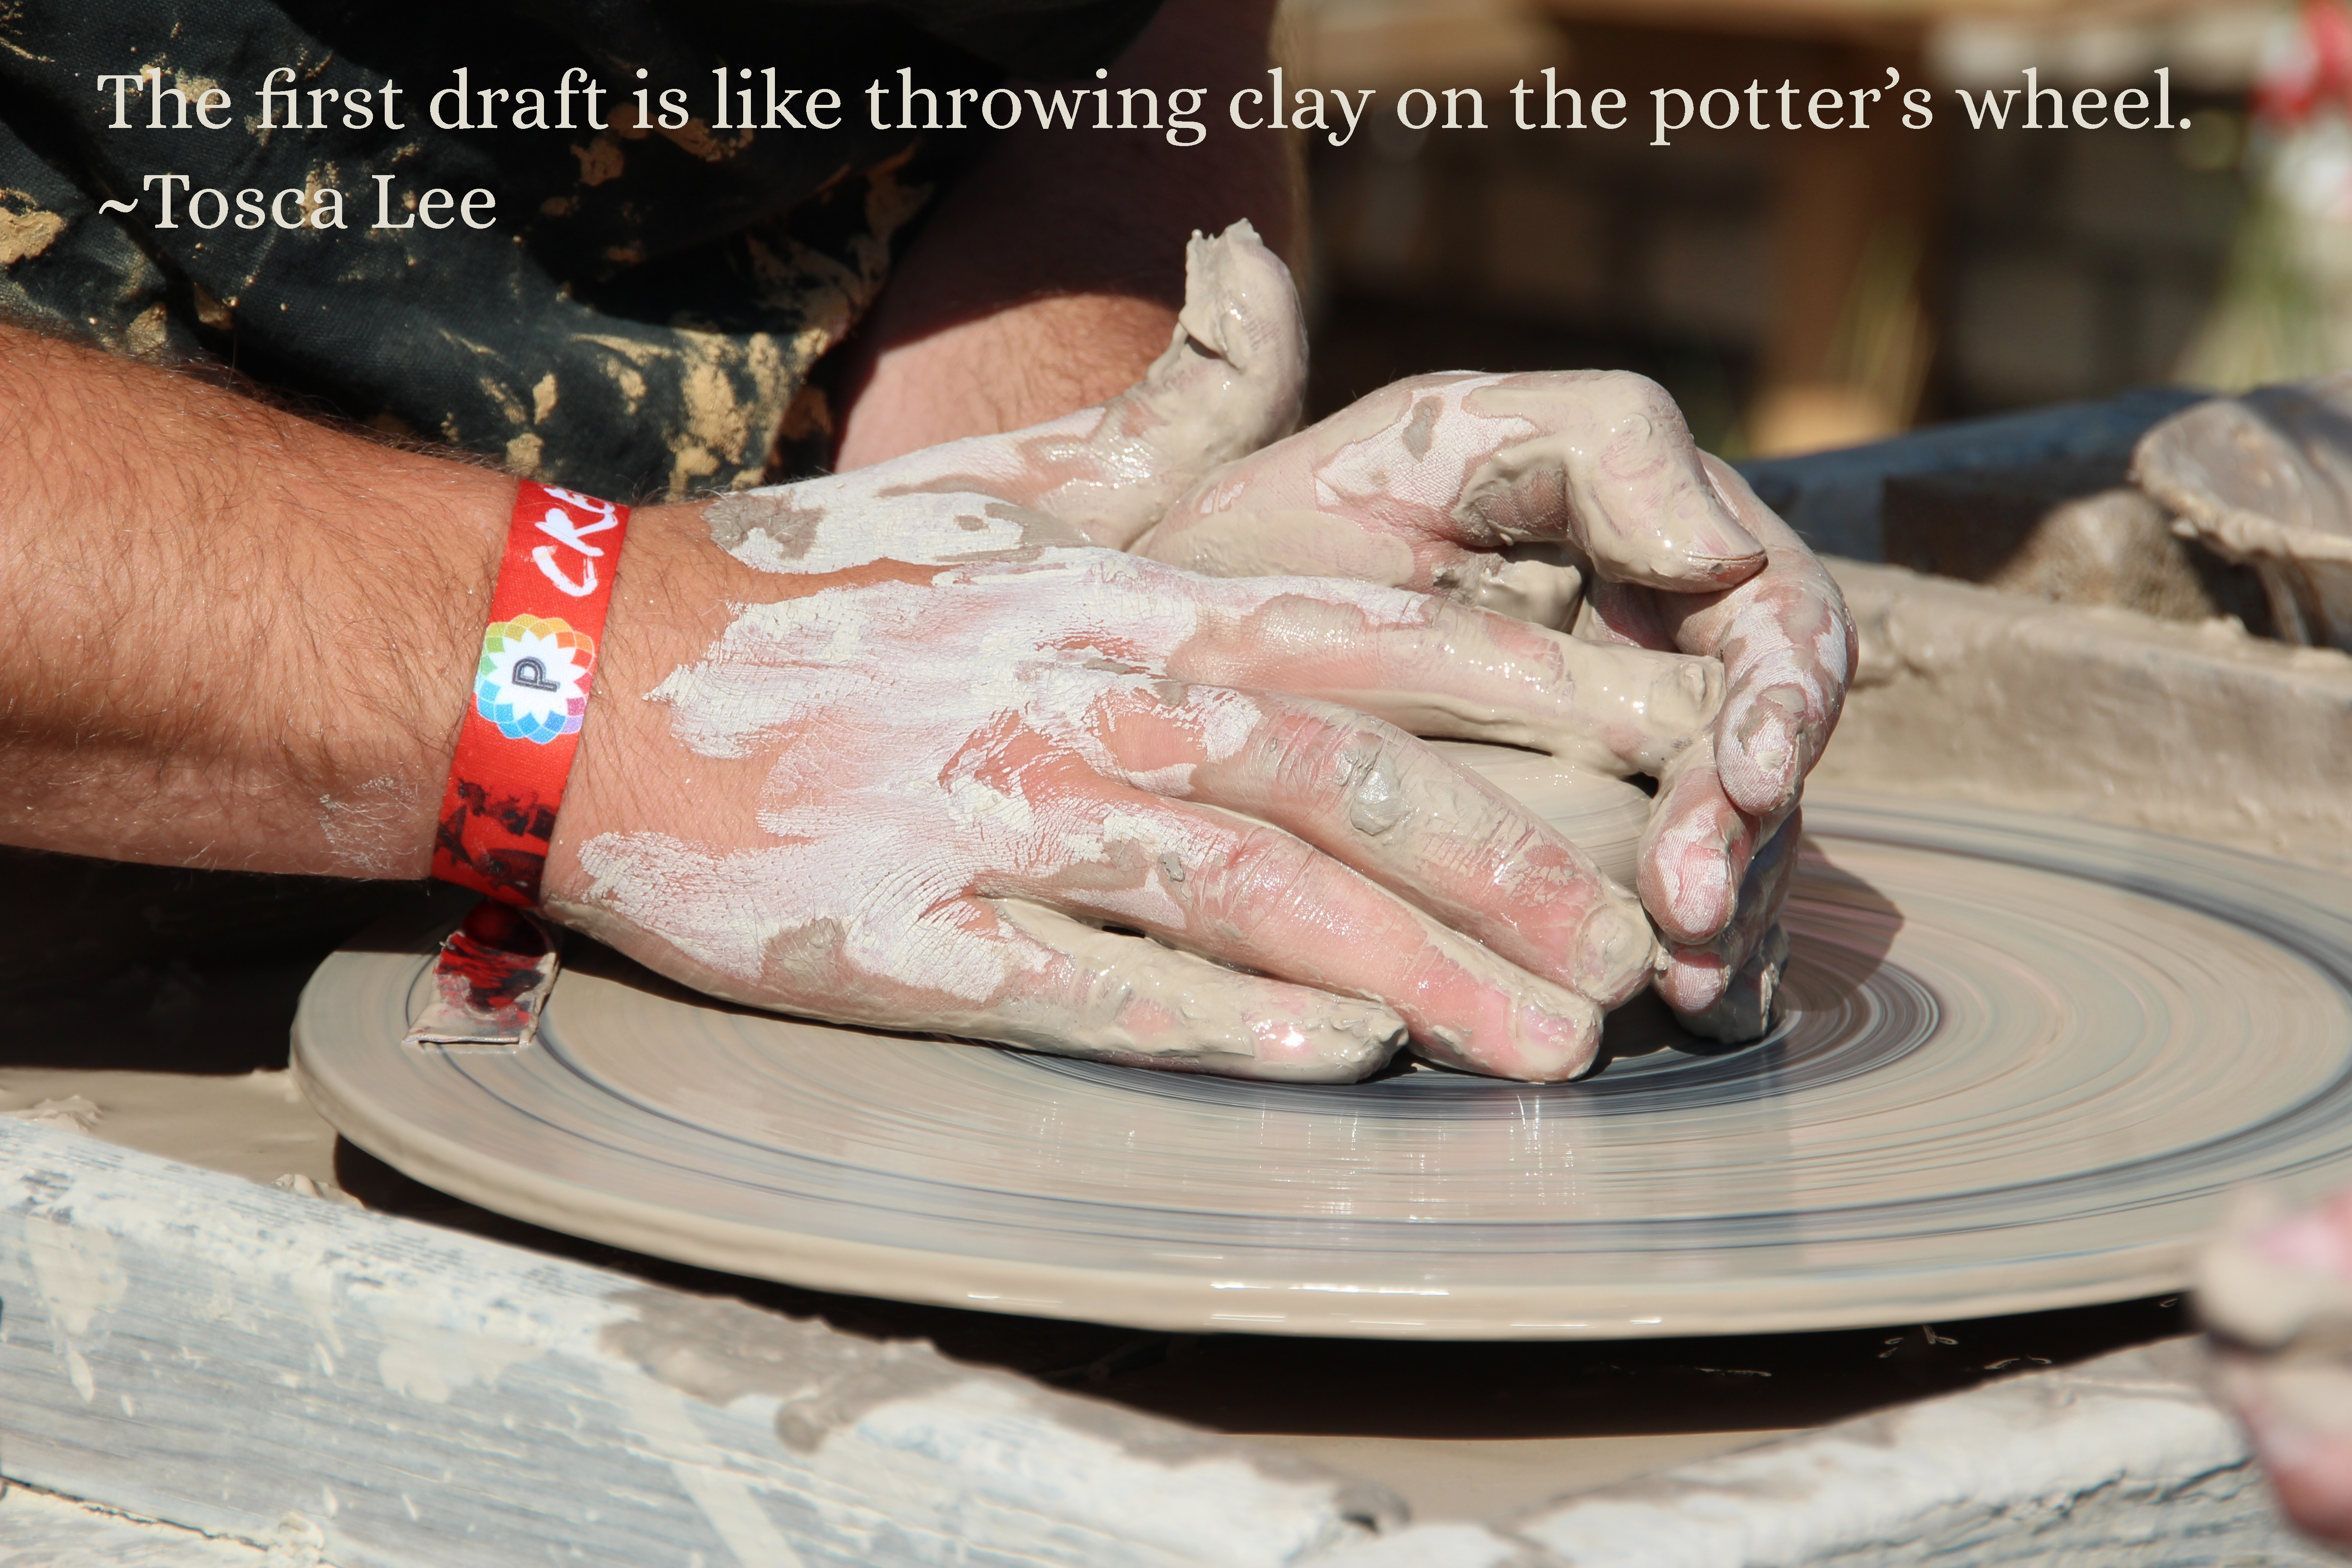 First draft potter quote Tosca Lee